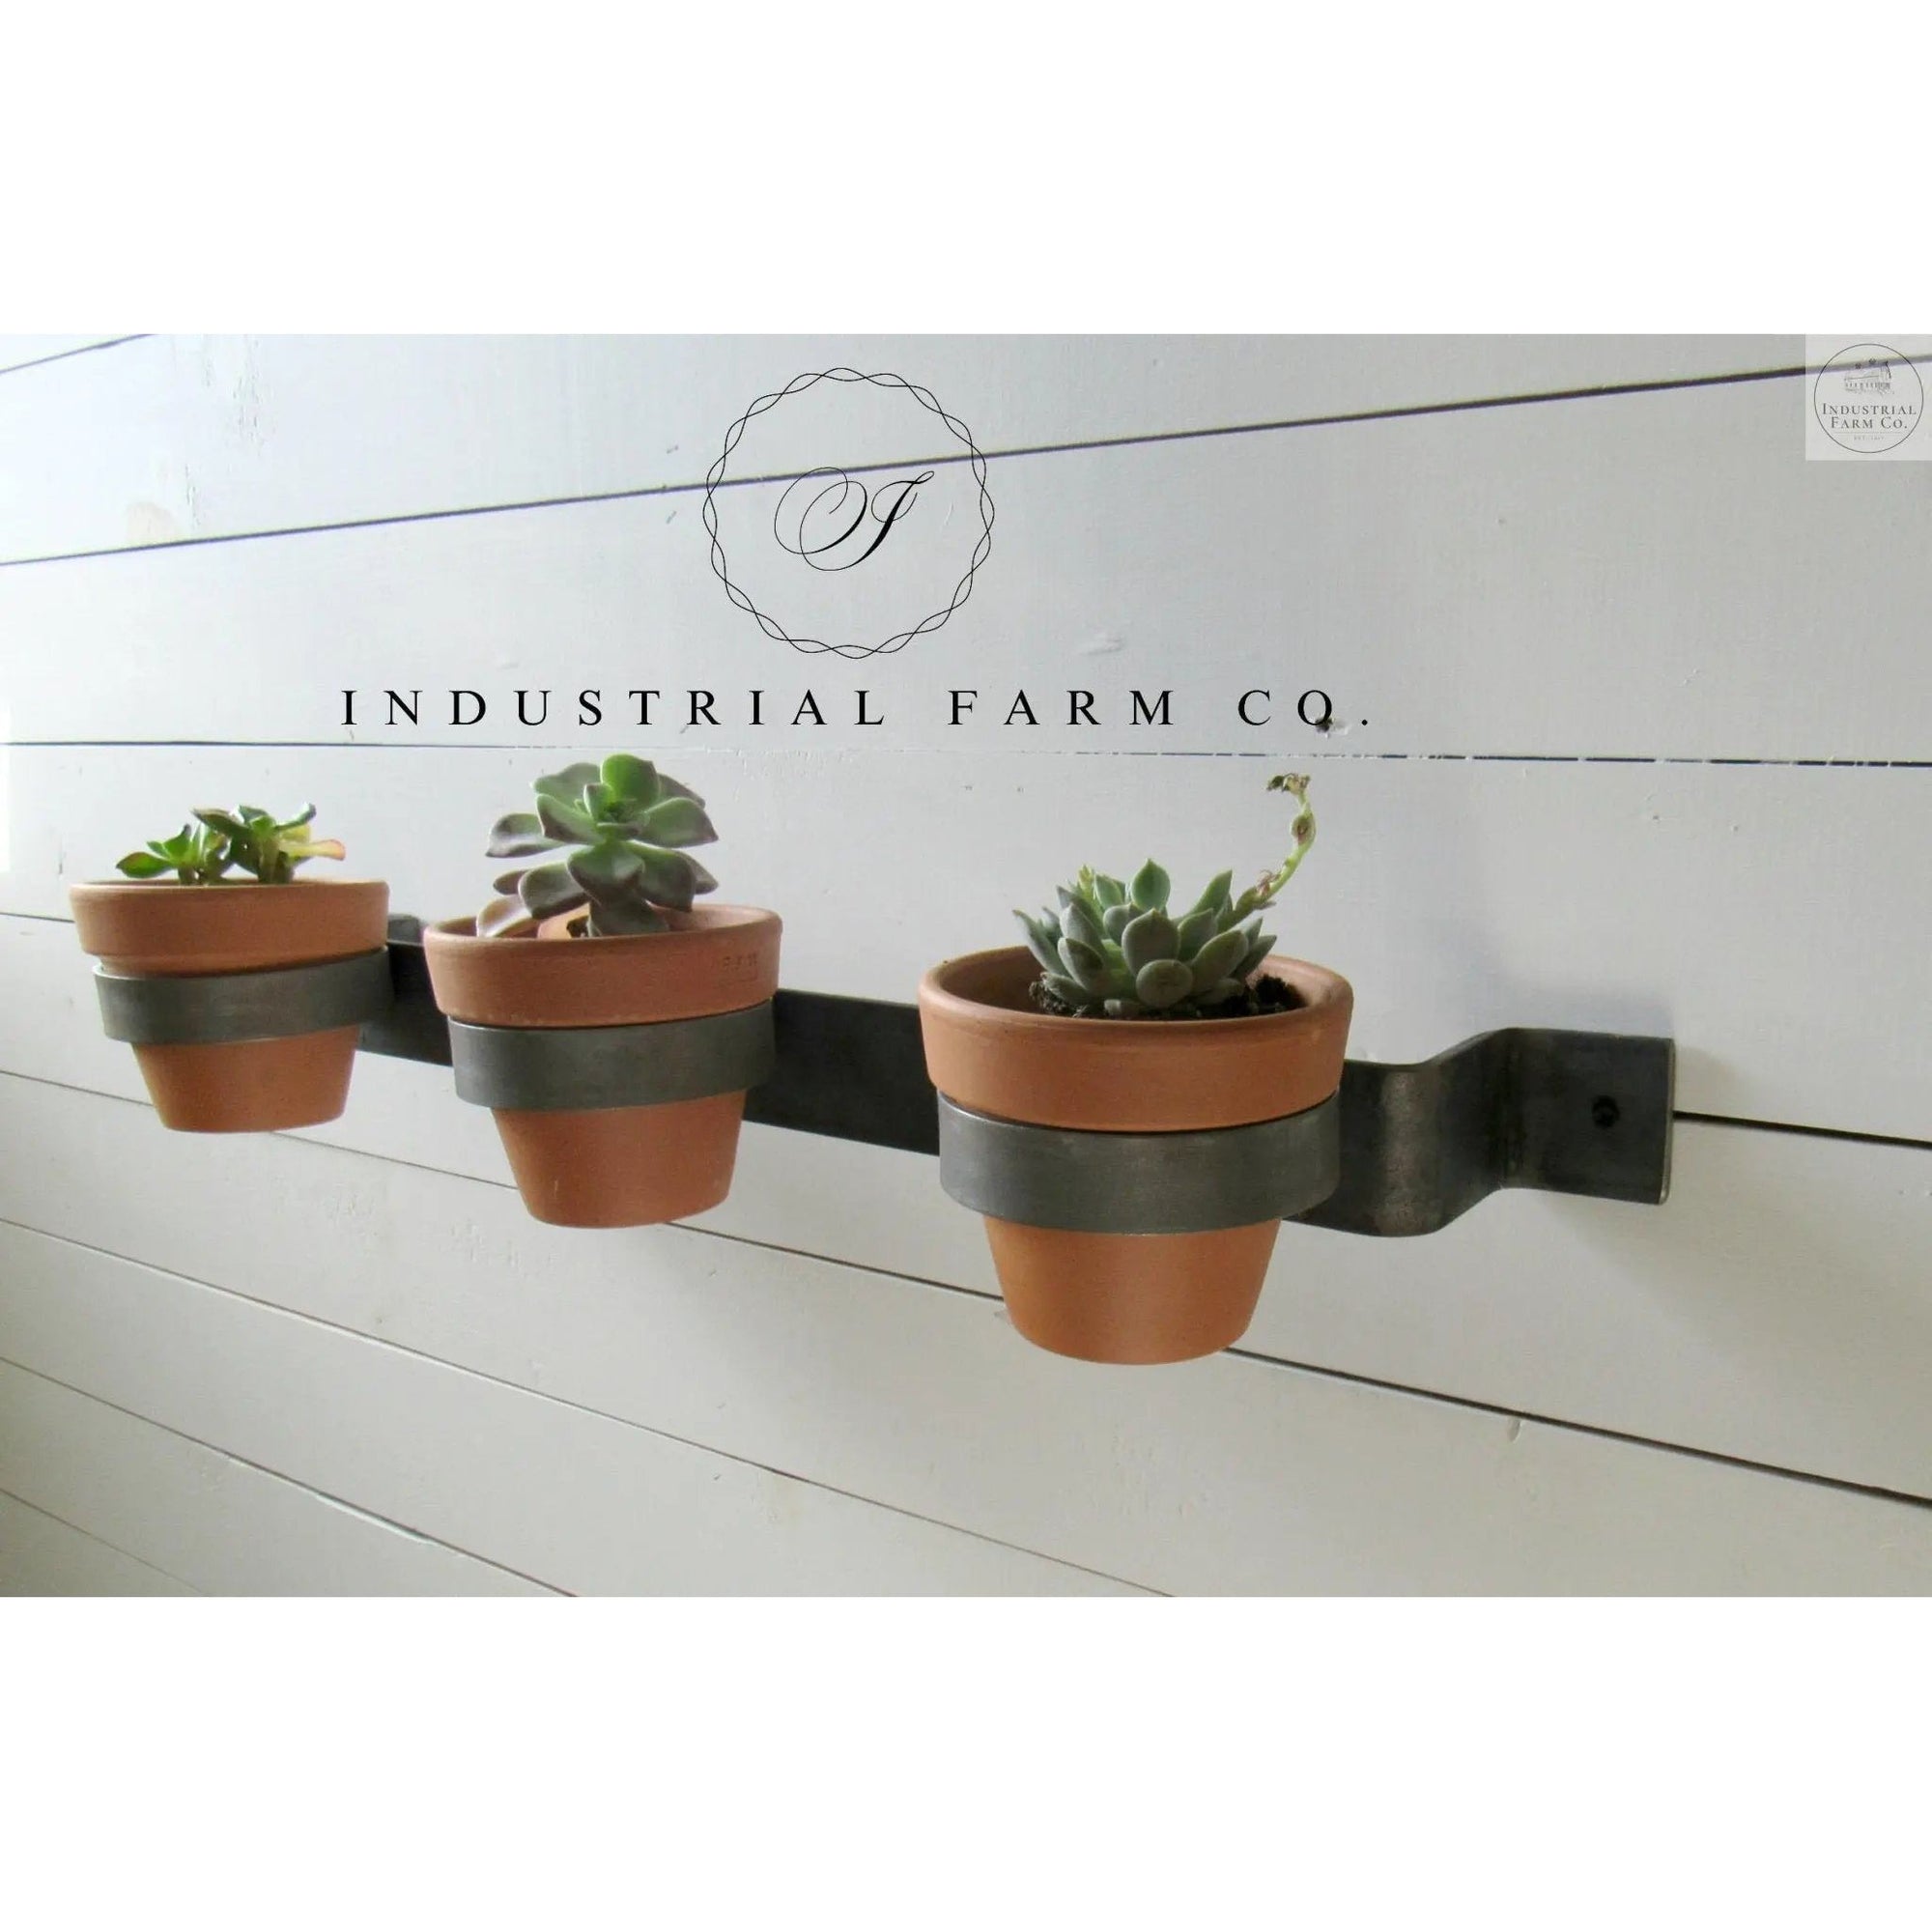 The Yonkers Horizontal Planter Plant Holder 24" Style 4" Pots | Industrial Farm Co